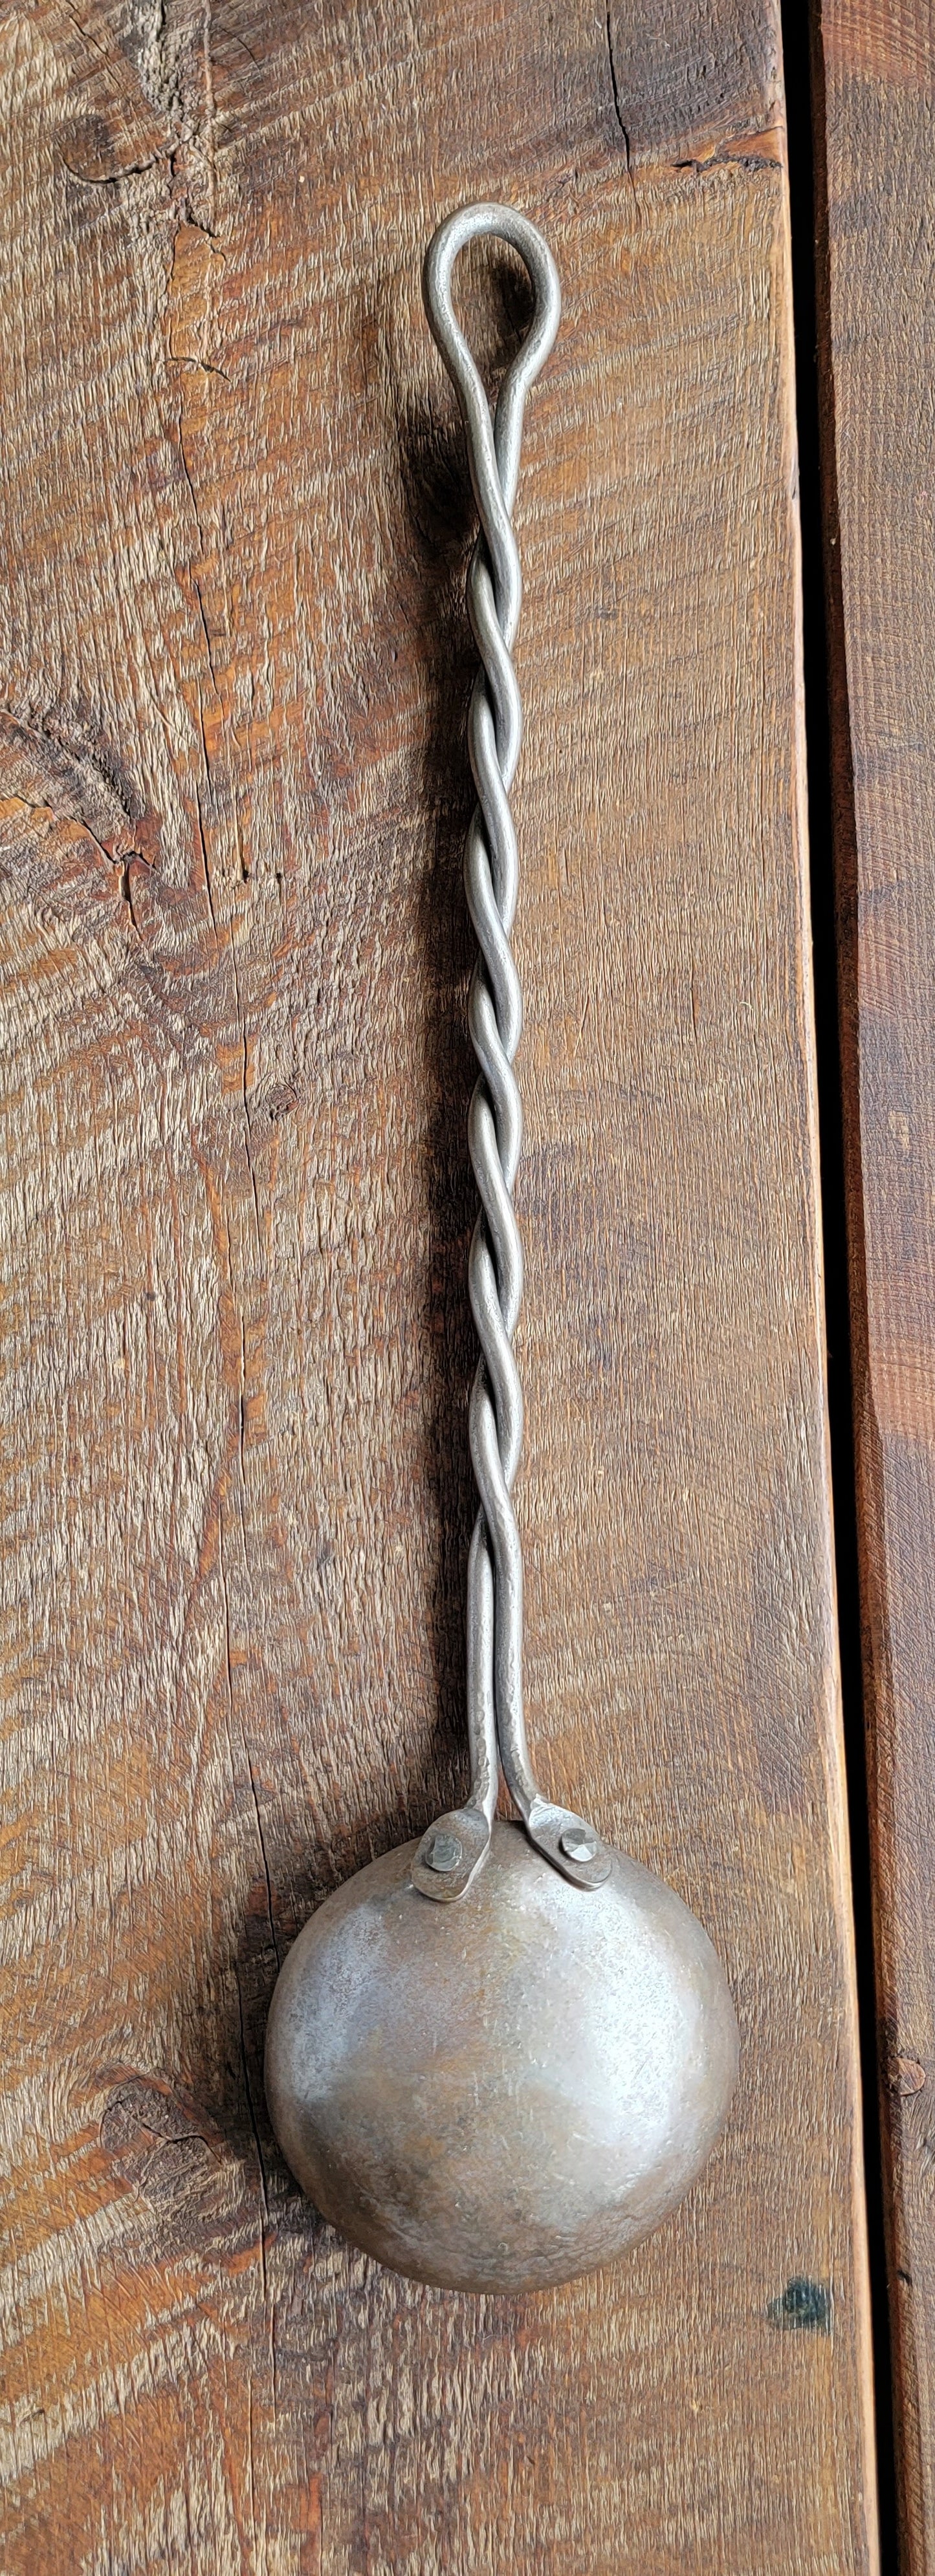 Hand Forged Twisted Steel Egg Spoon